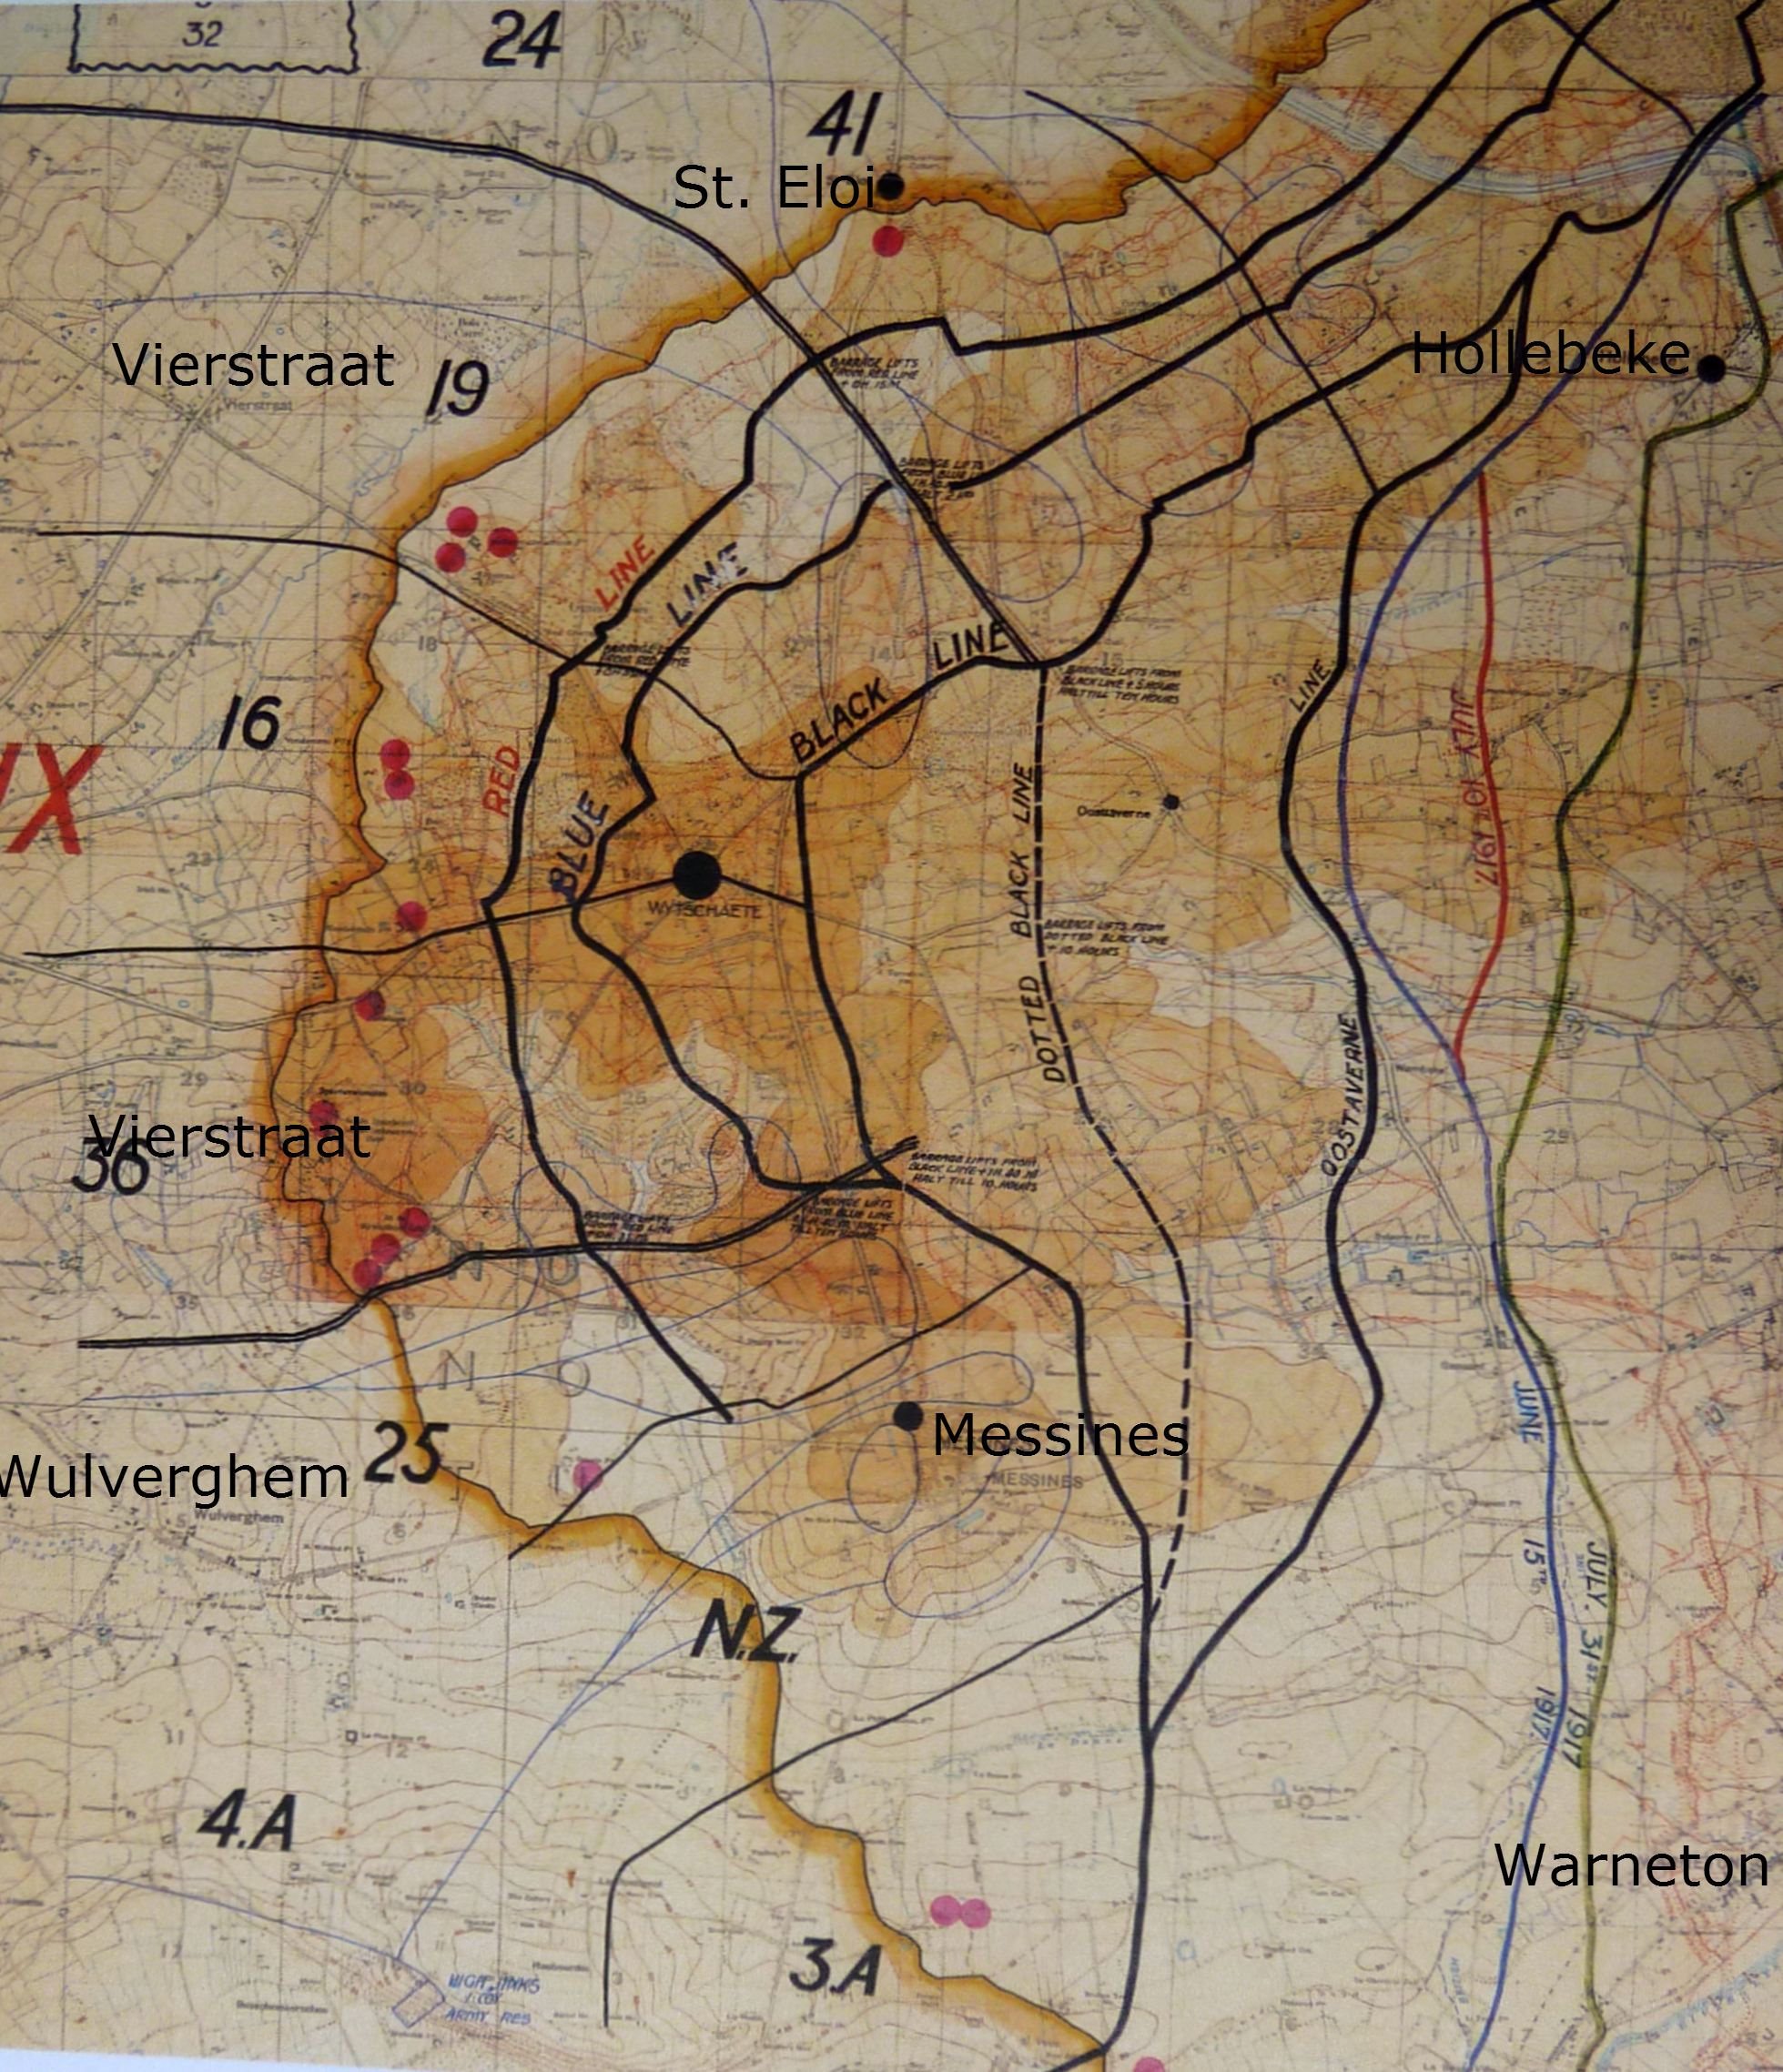 Battle of Messines map